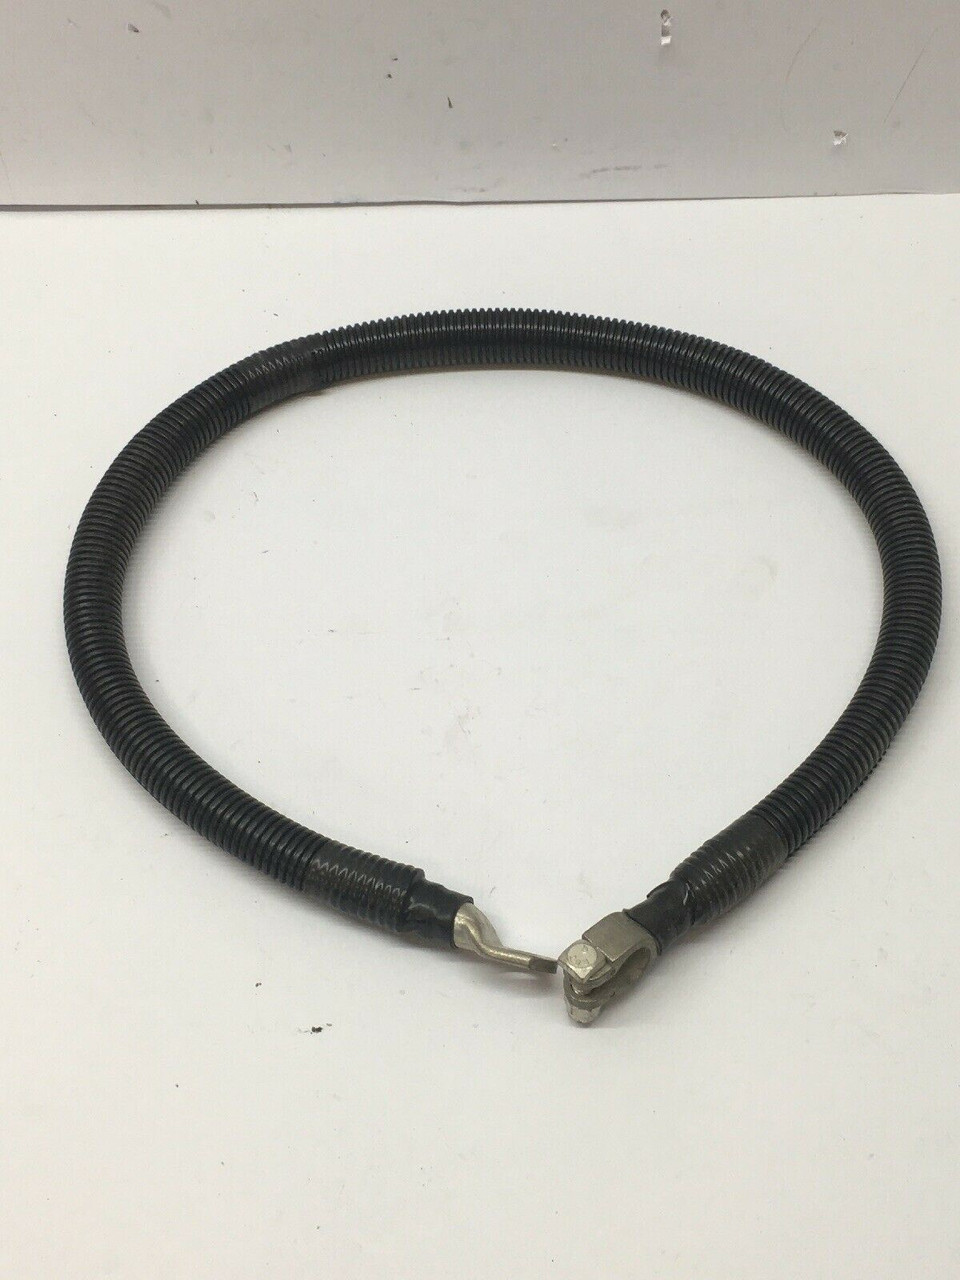 Battery Cable 10015946 3/0X 40" L, 1/2 & 1/2, Black Ground Wire